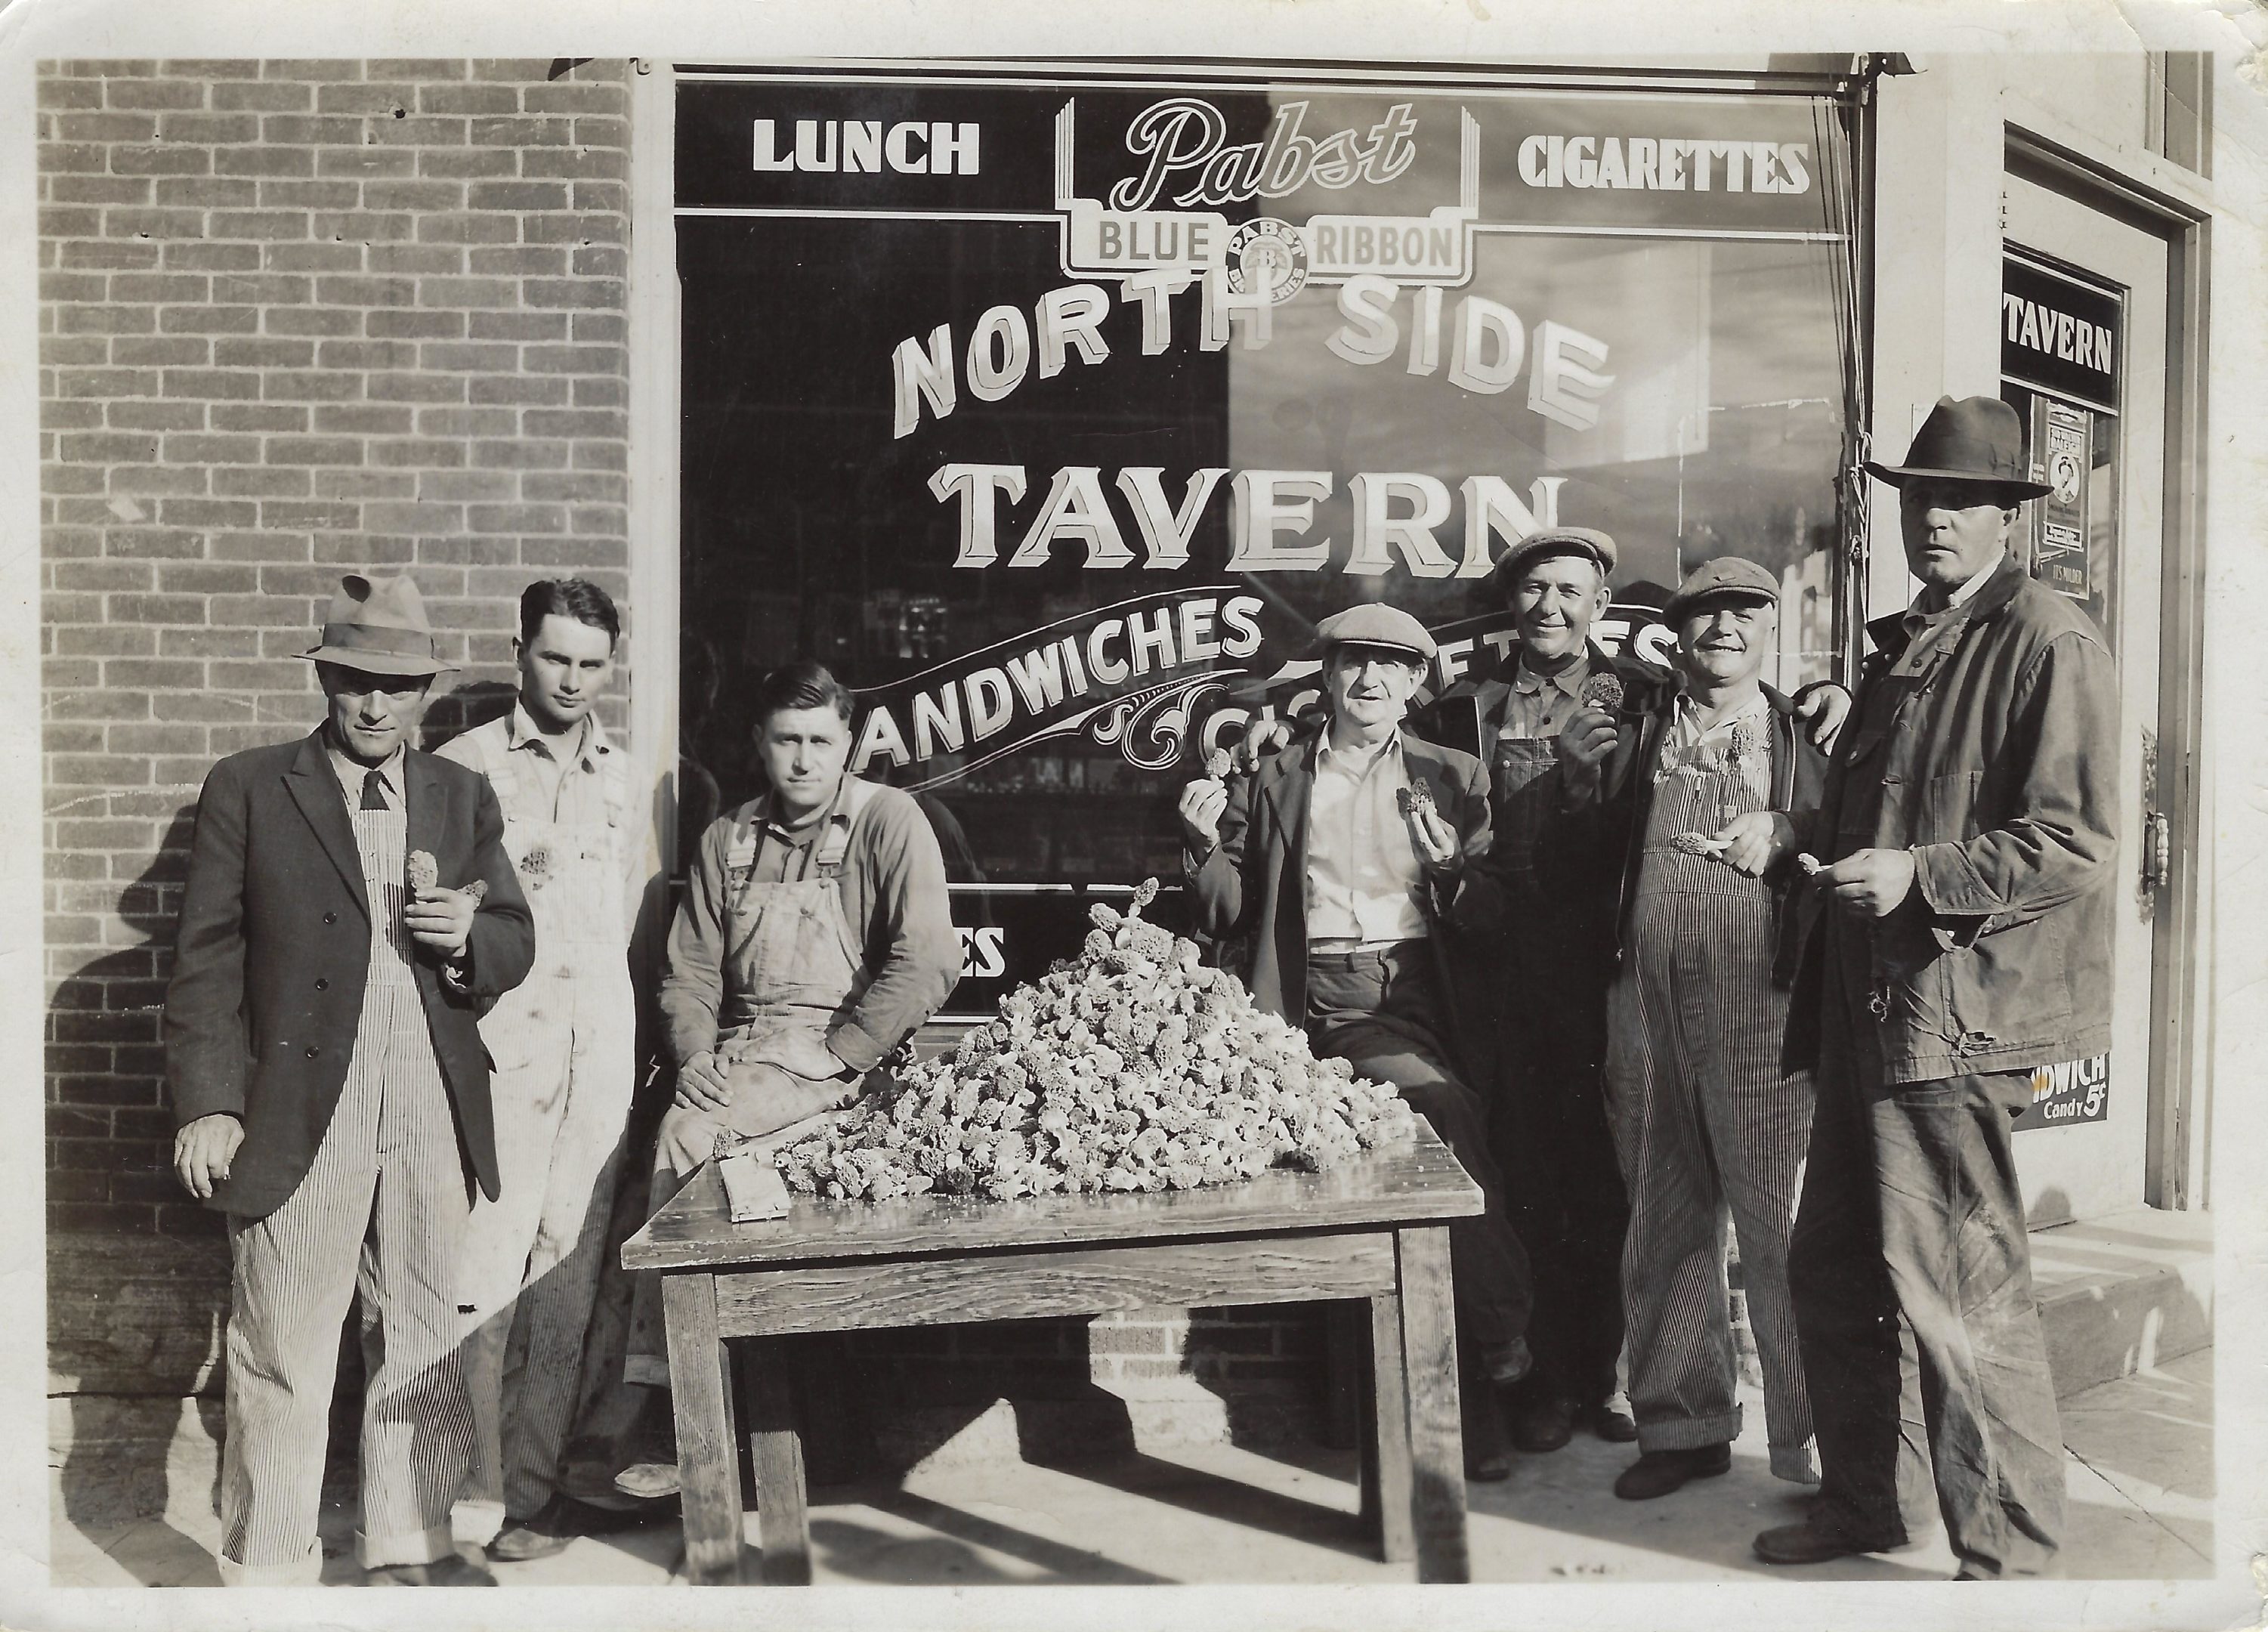 Photo of mushroom hunters in front of Northside Tavern. @ 1939